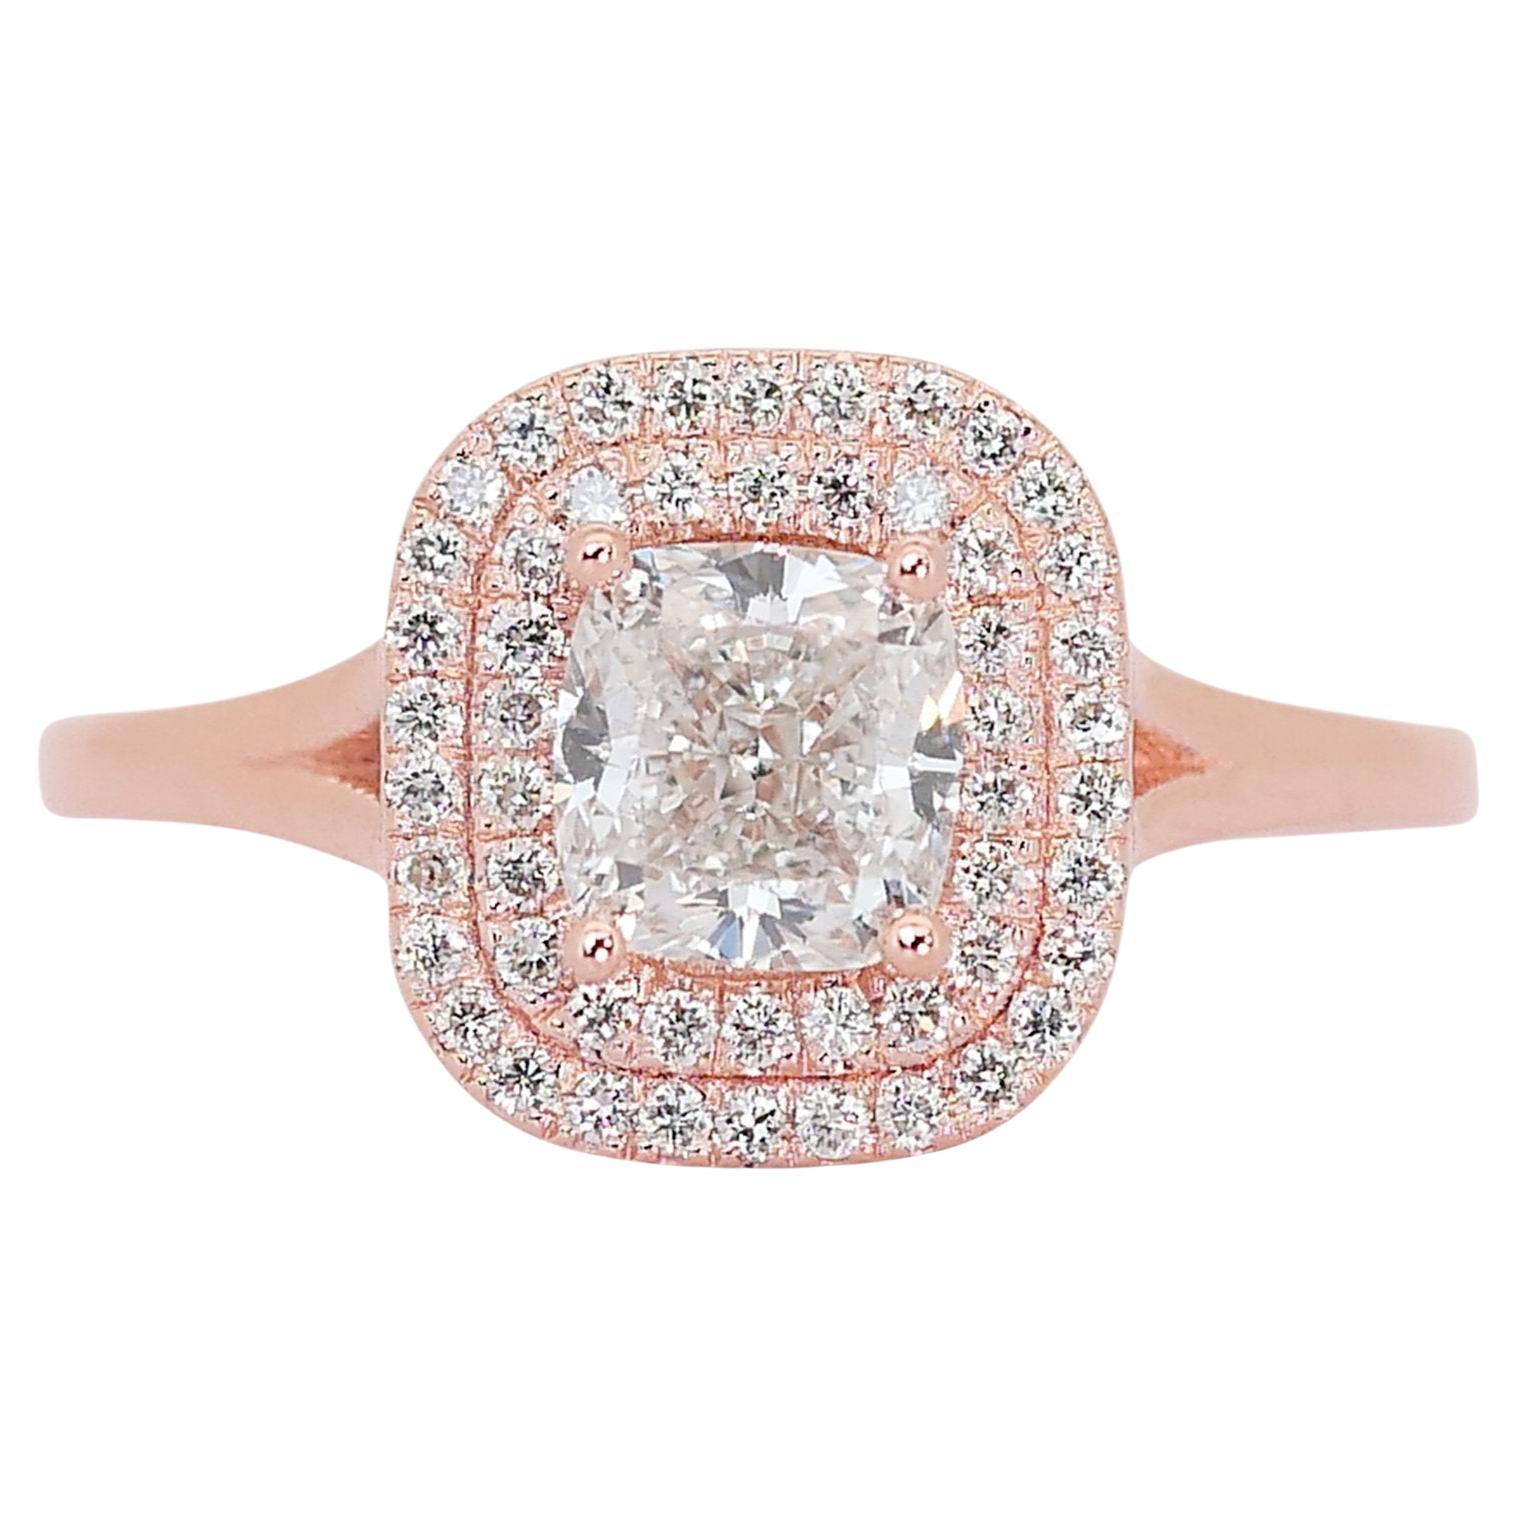 Elegant 1.41ct Diamonds Double Halo Ring in 18k Rose Gold - GIA Certified For Sale